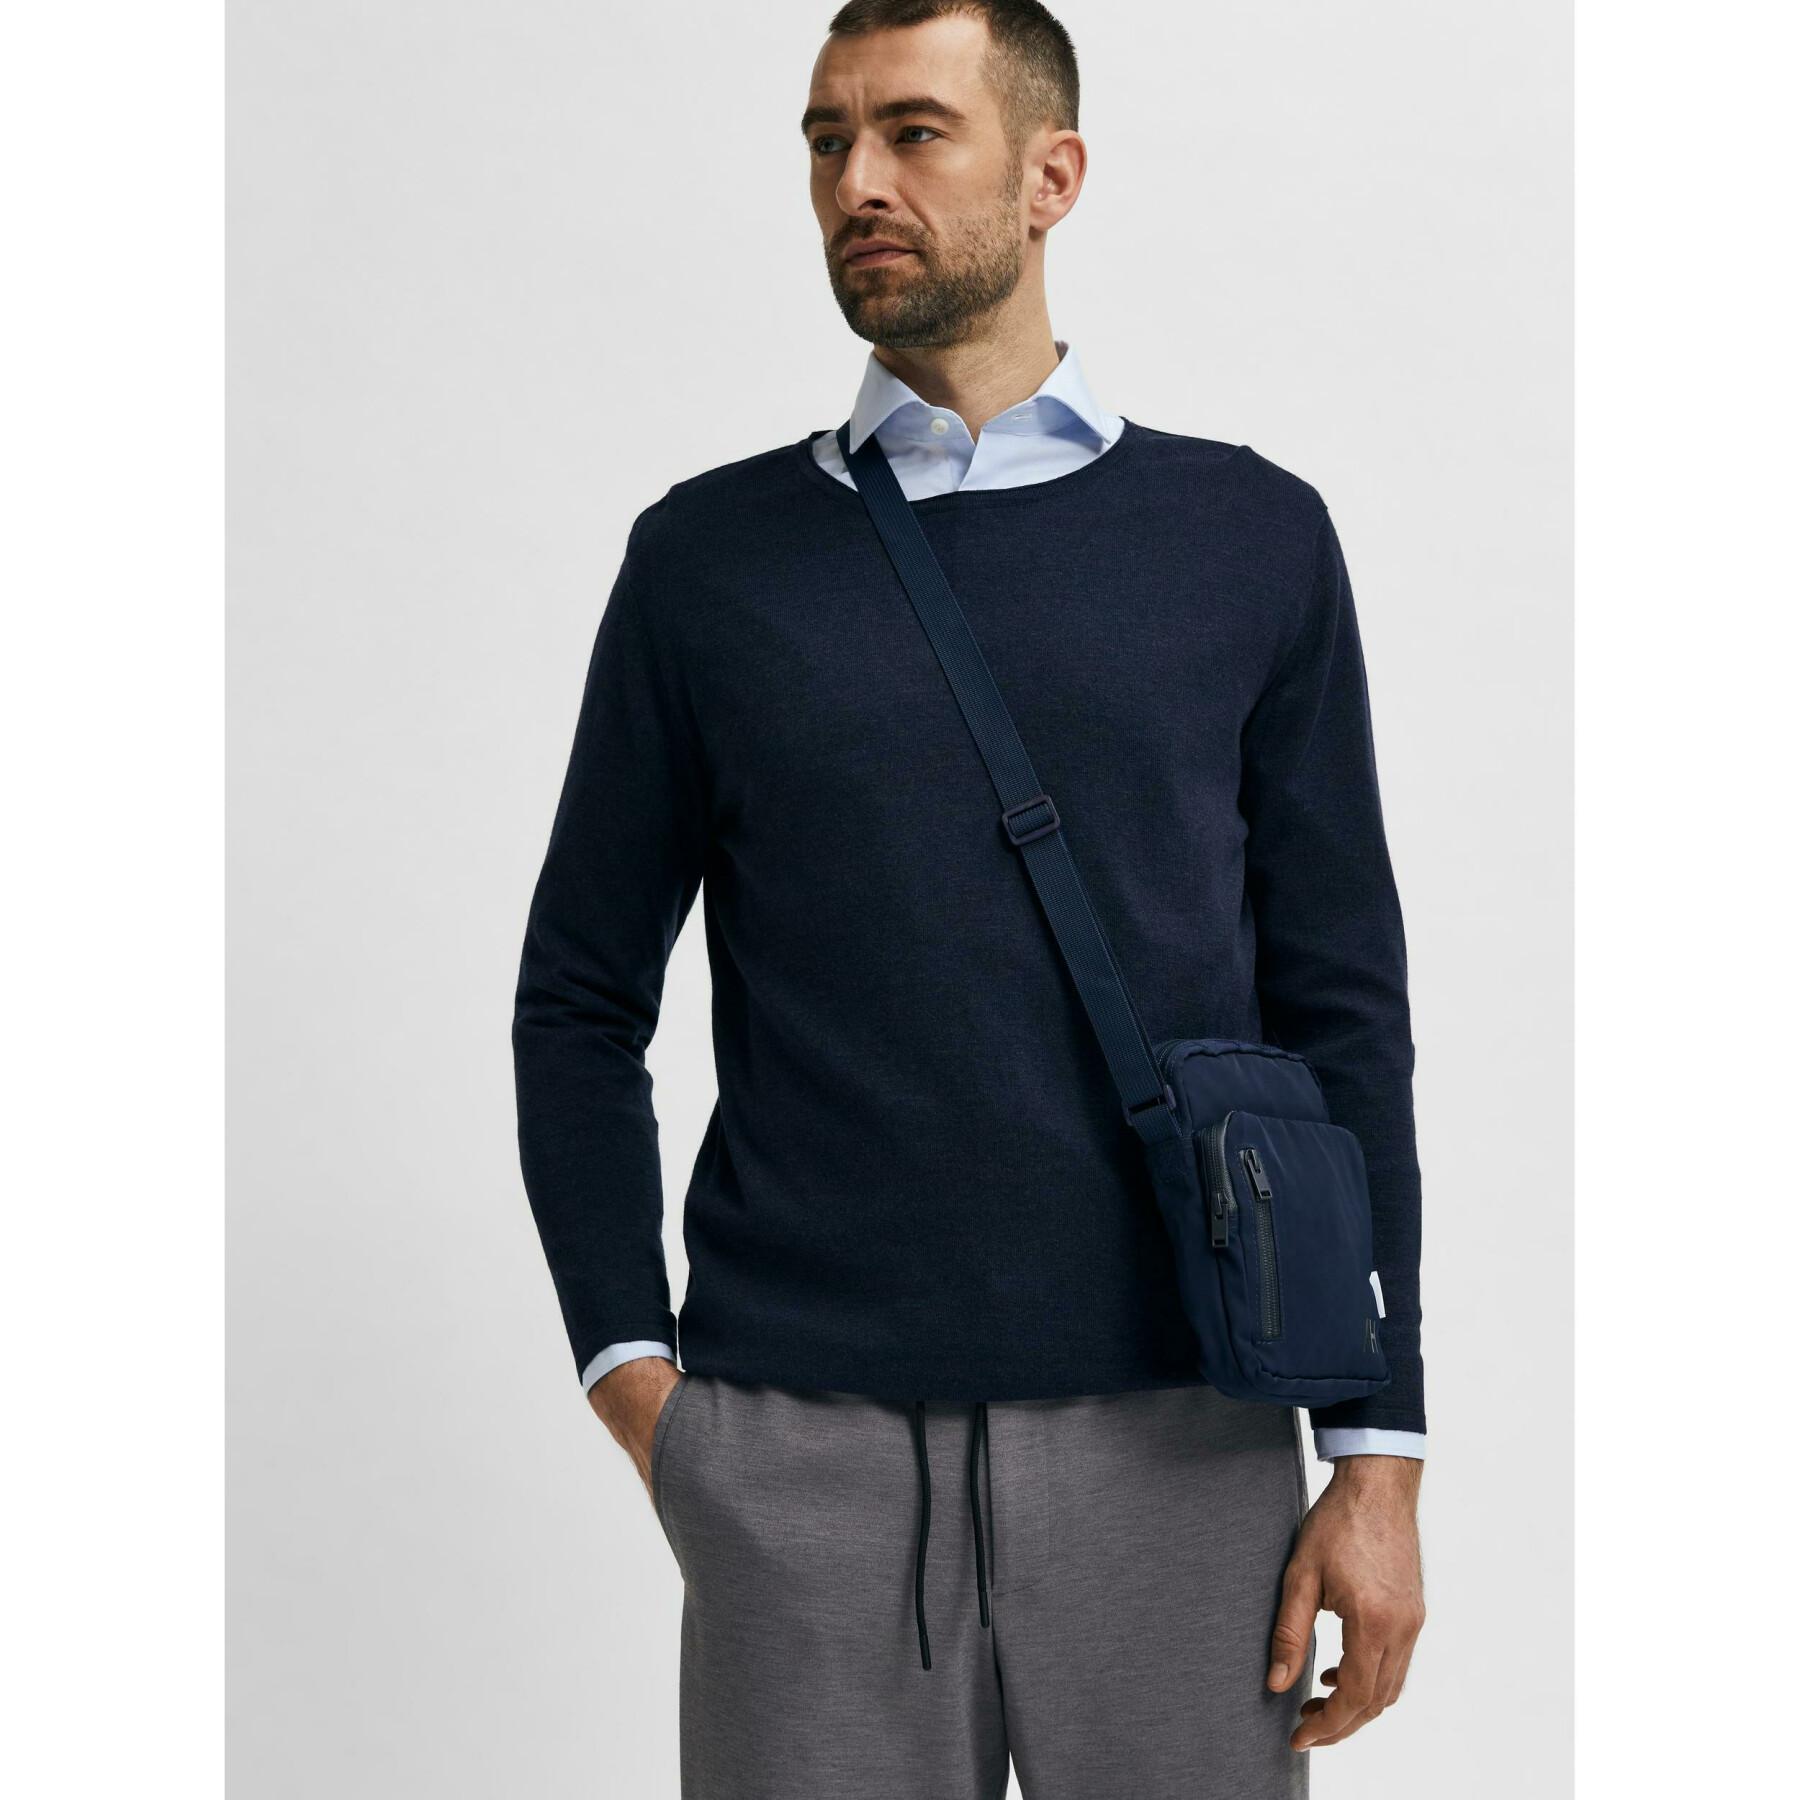 Pullover Selected Rome lange mouwen rond